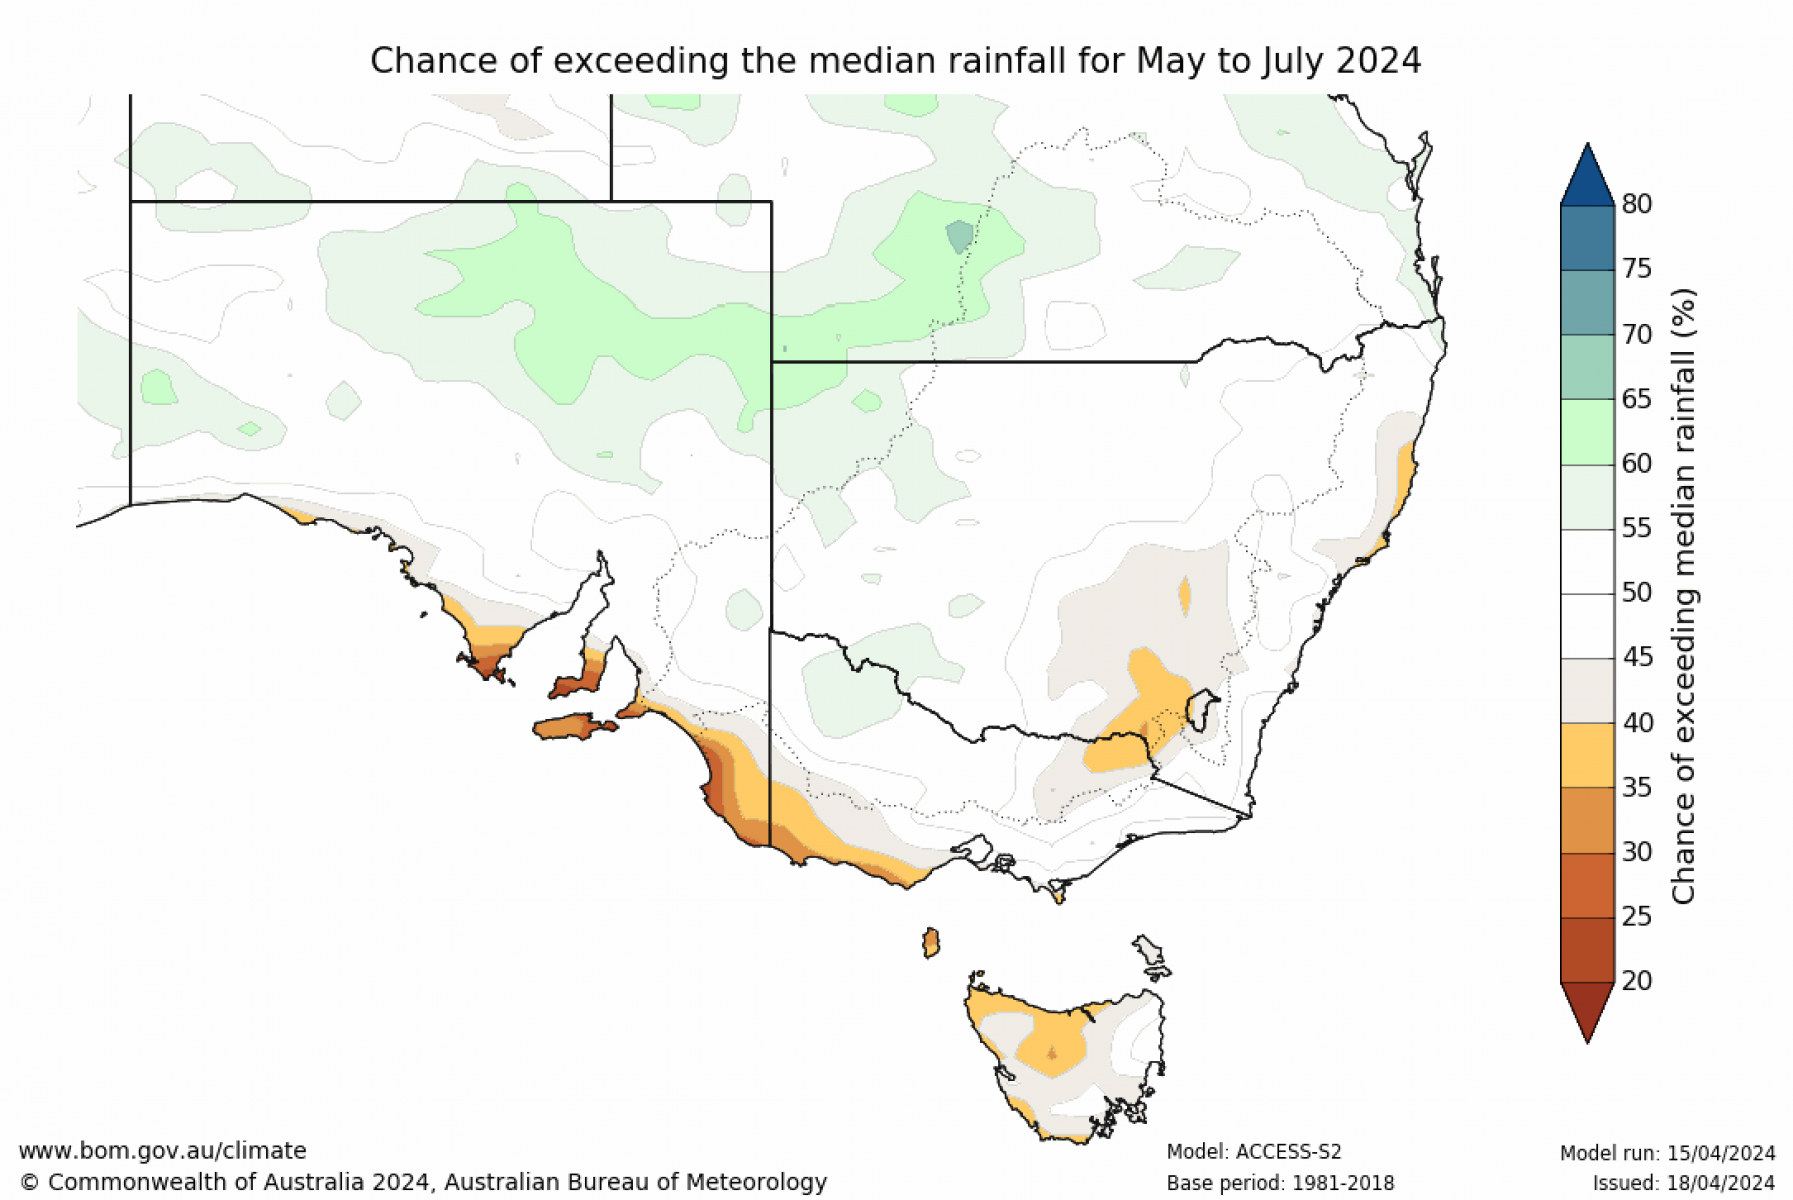 Chance of exceeding median rainfall for May to July 2024